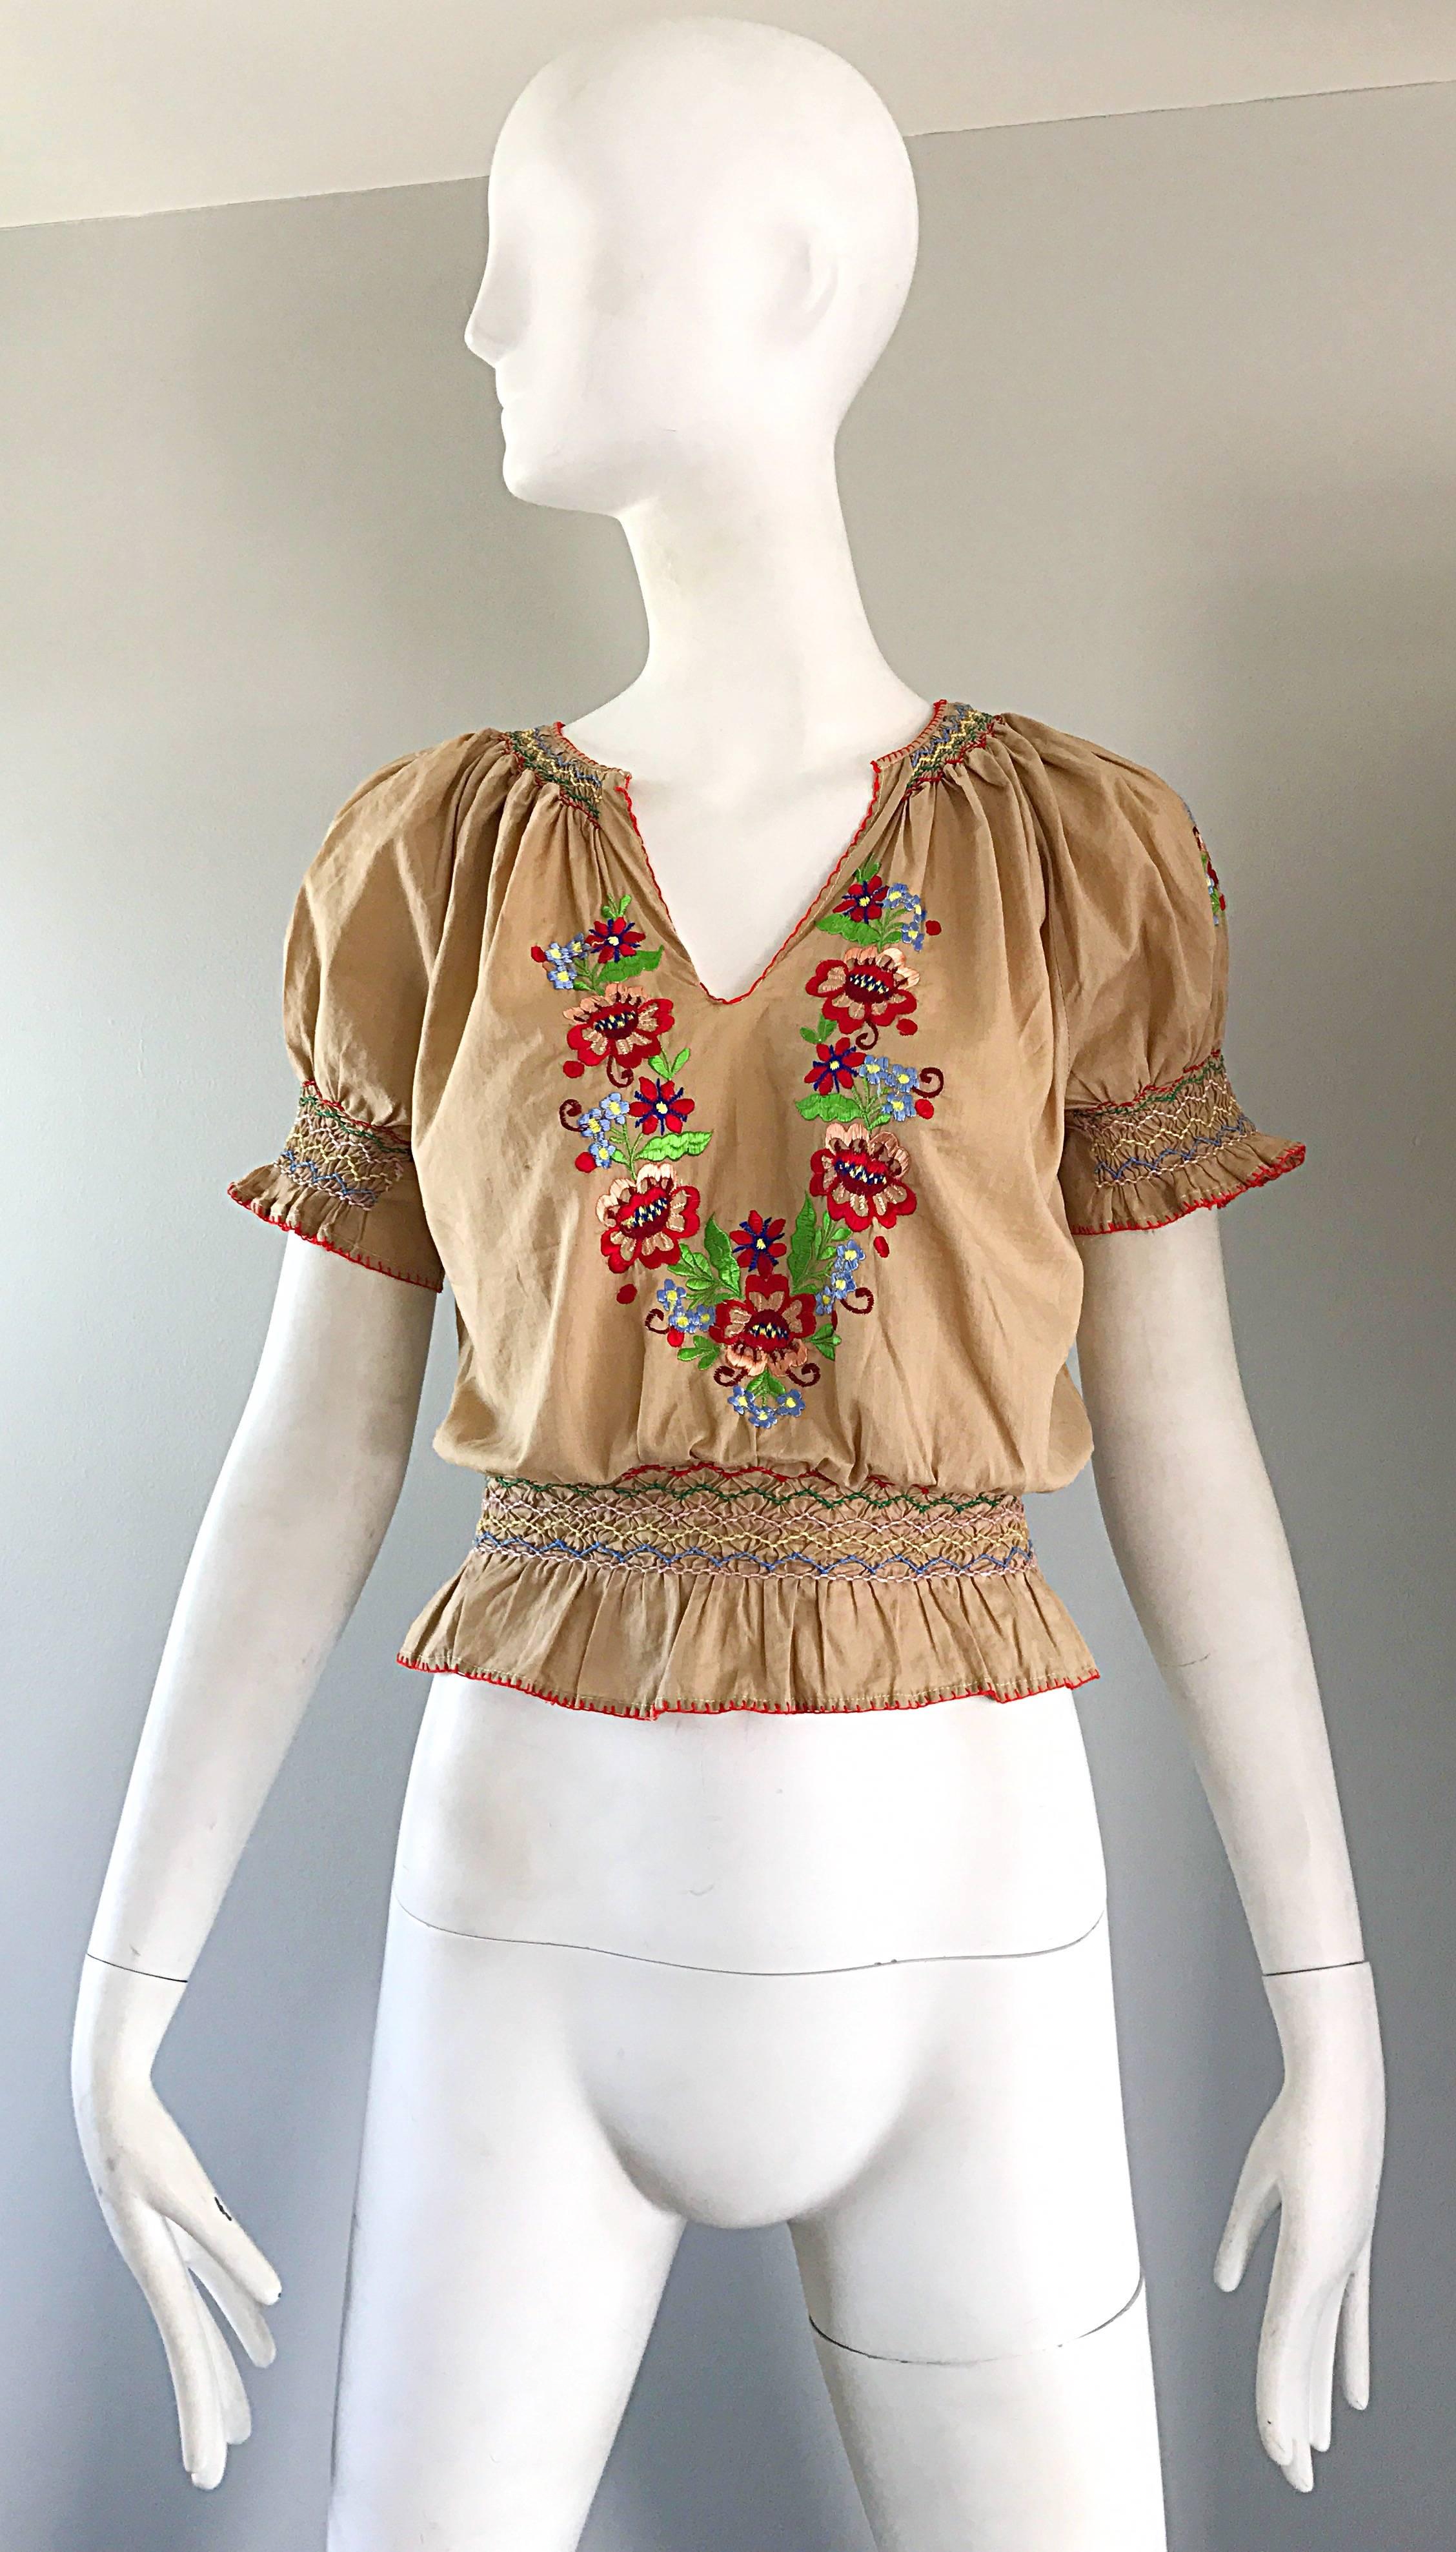 Rare and oh so chic 1940s Hungarian embroidered cotton cropped boho peasant shirt ! Classic light khaki tan color, with hand-sewn embroidered flowers in vibrant red, pink, yellow, green, blue, and white. Smocked detail at sleeve cuffs and at